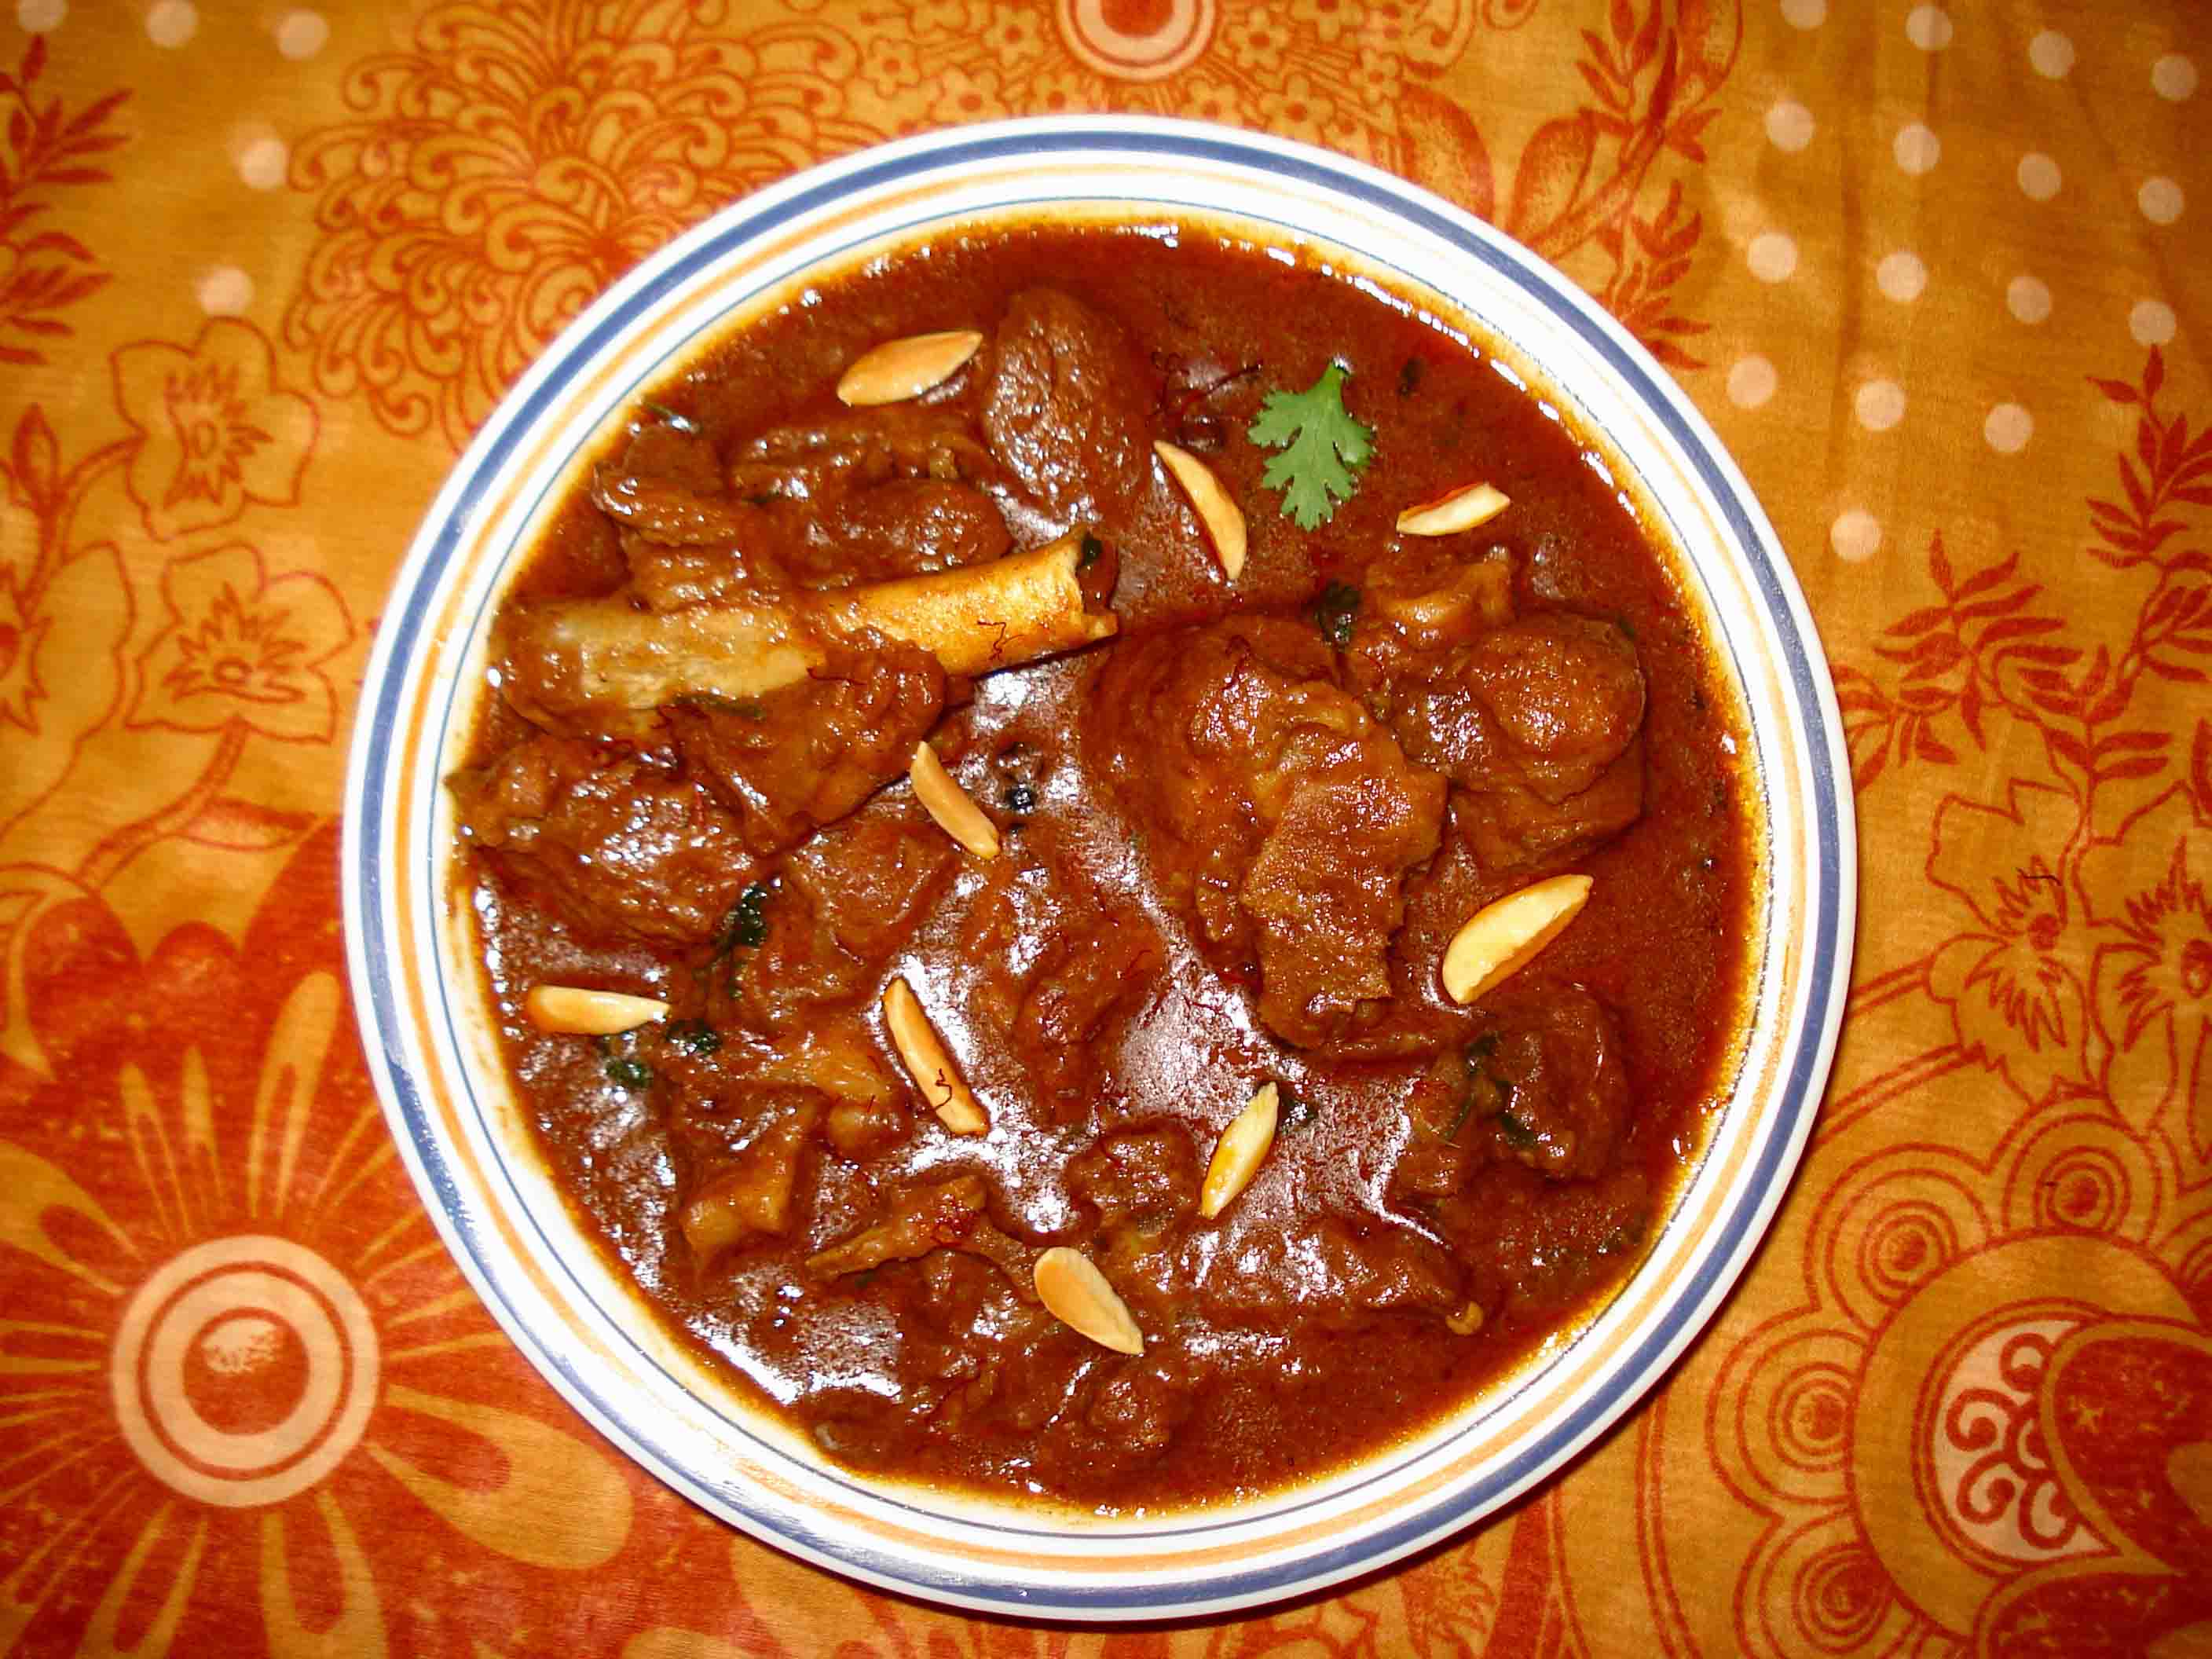 Mutton curry serves 3 persons